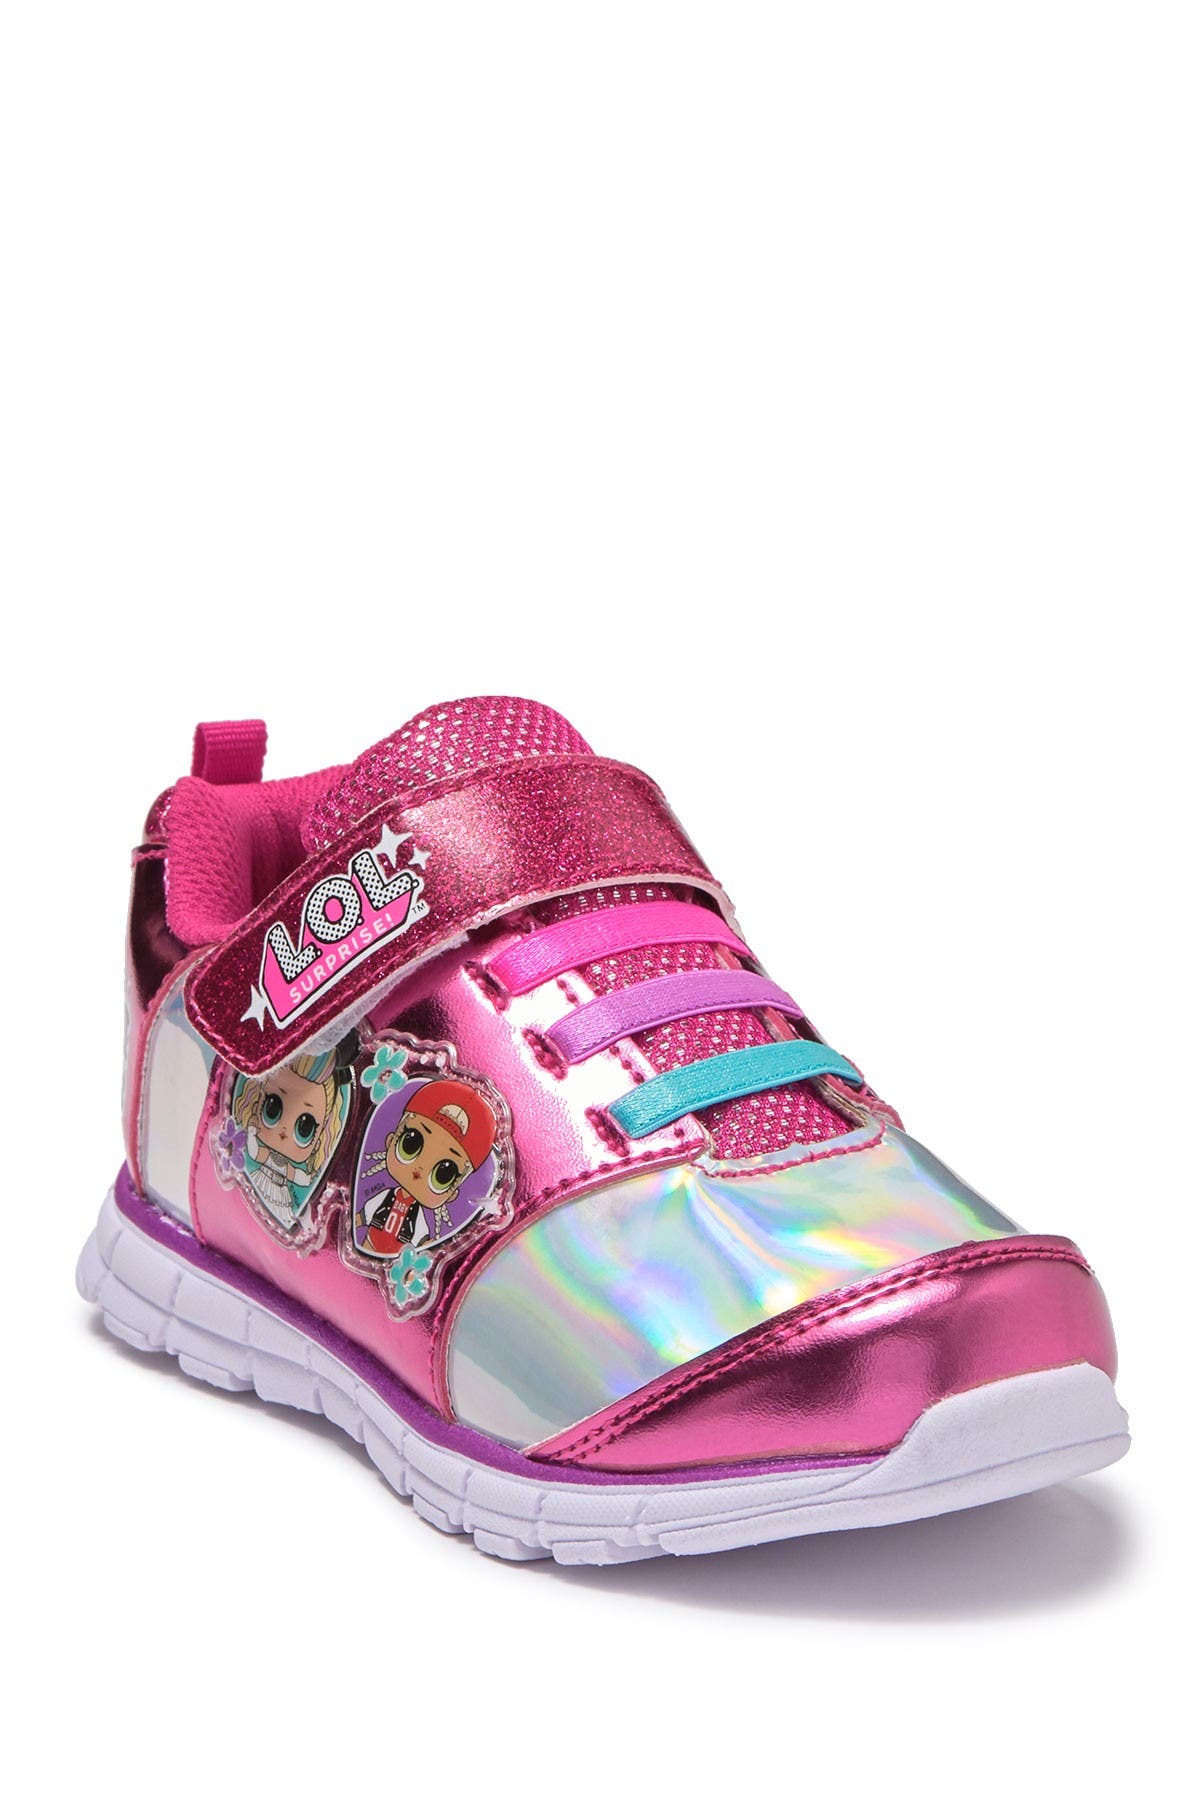 lol surprise light up sneakers